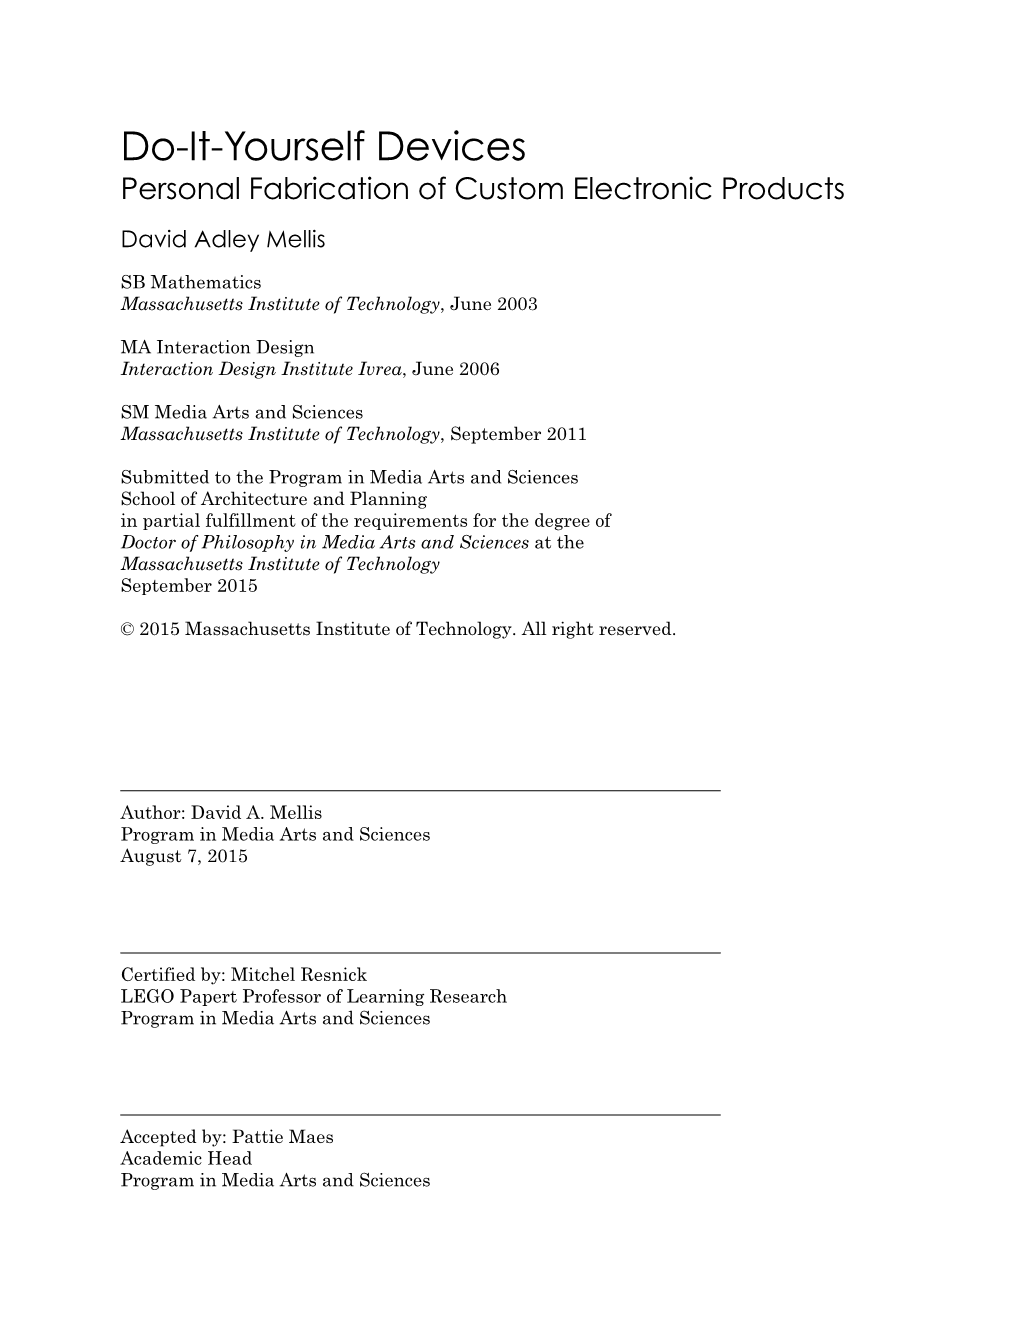 Do-It-Yourself Devices: Personal Fabrication of Custom Electronic Products